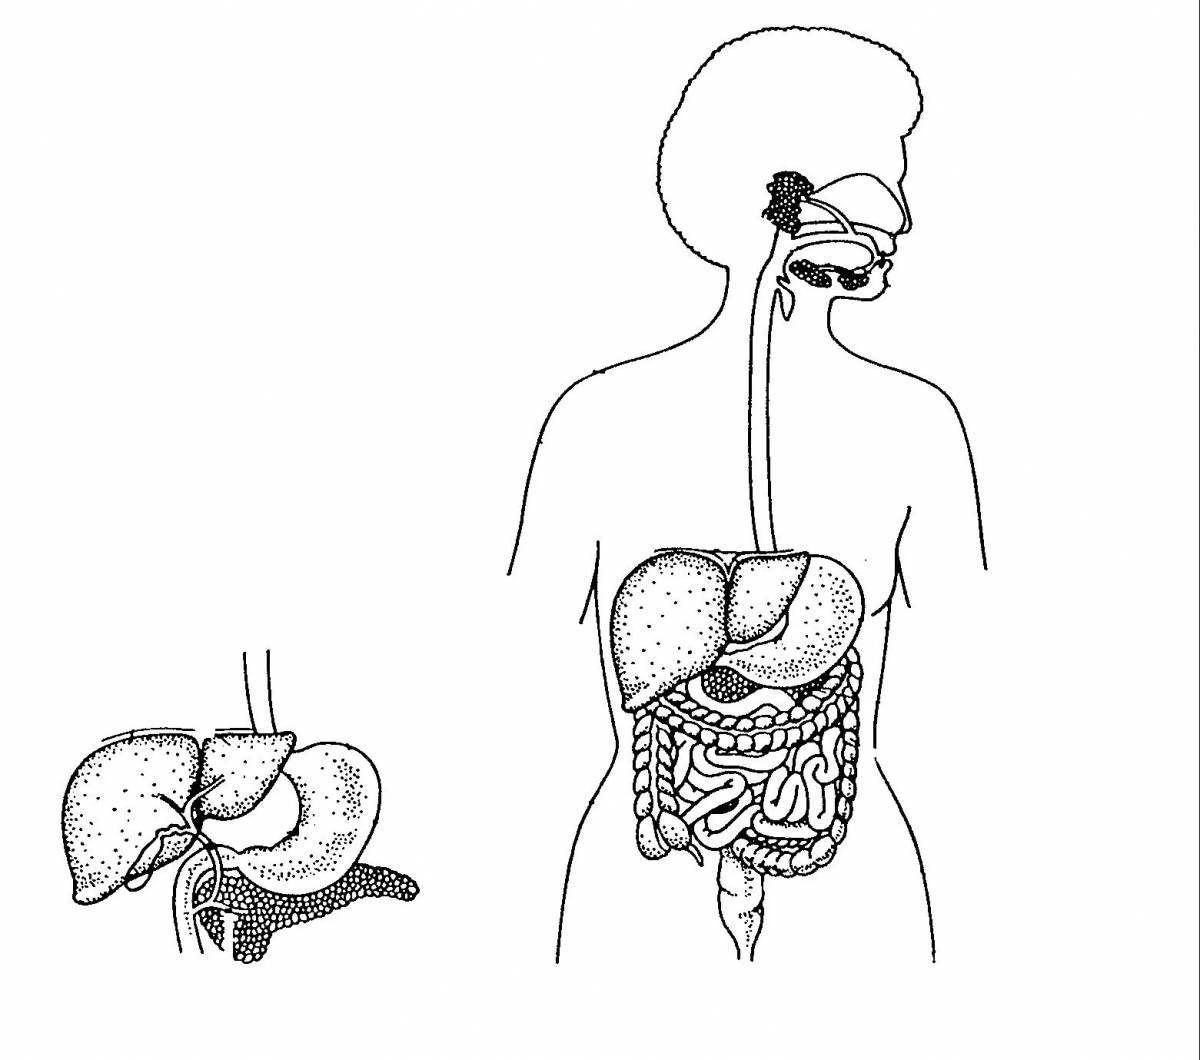 Amazing digestive system coloring page